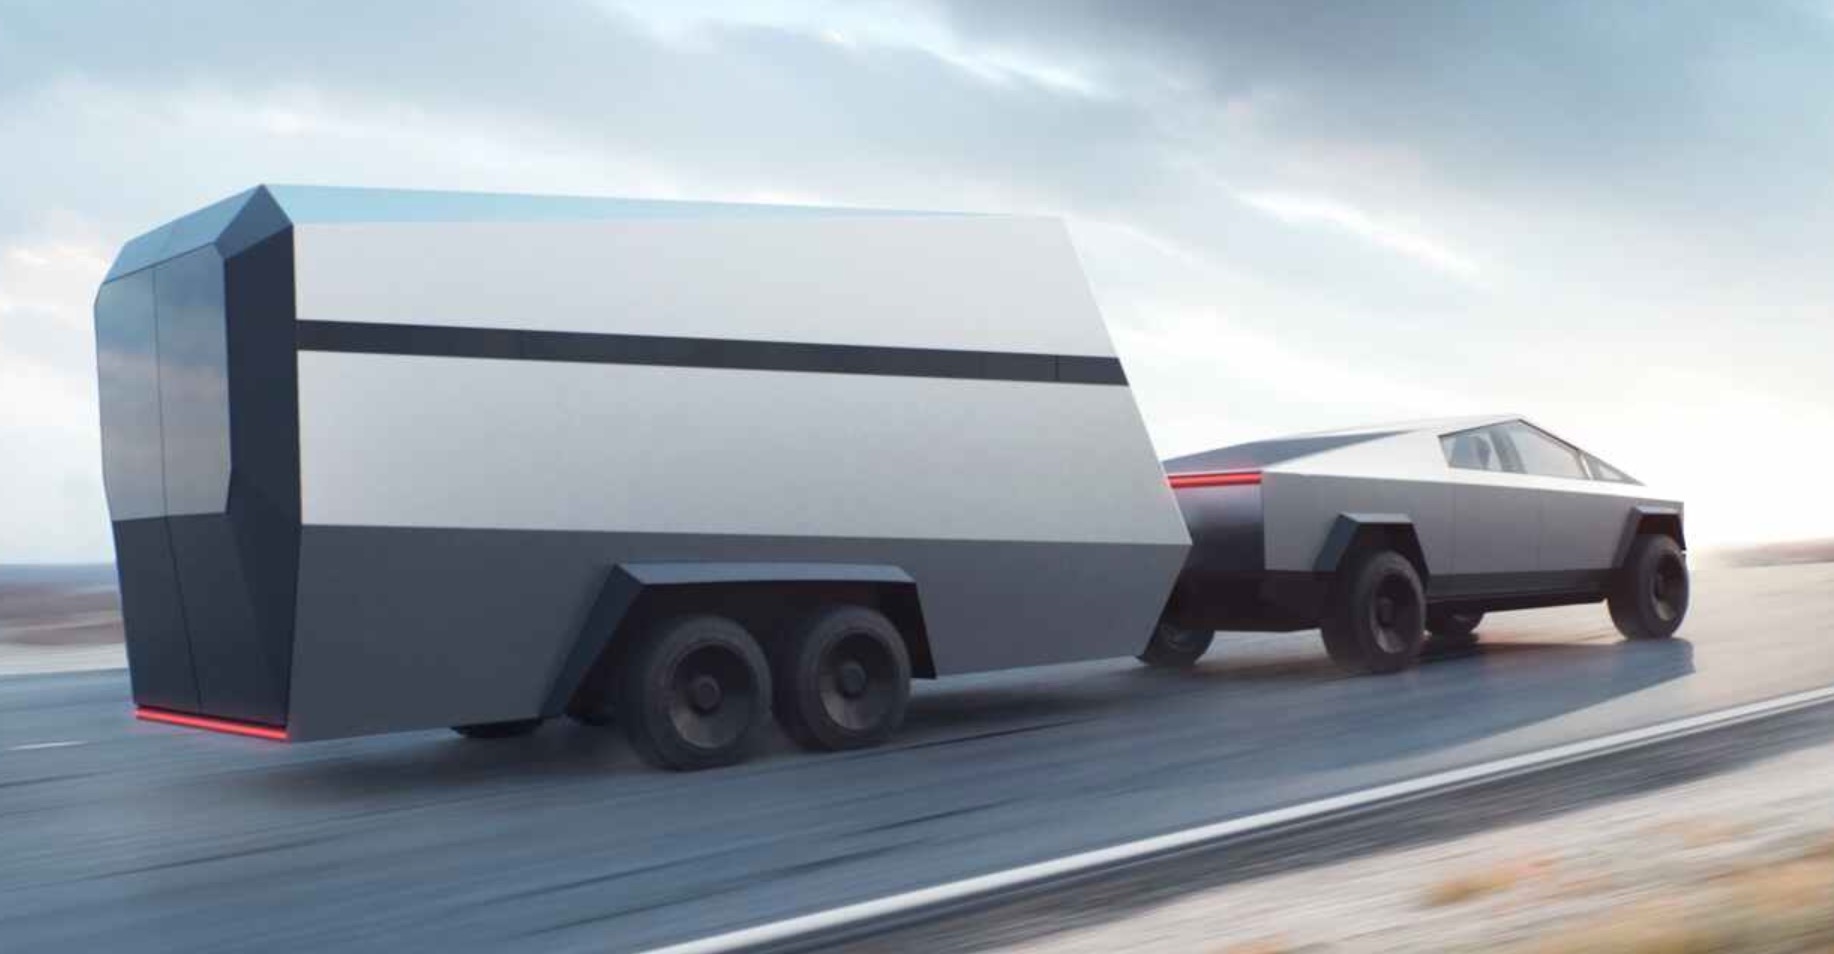 Tesla Cybertruck will launch a disruption in the camper/trailer